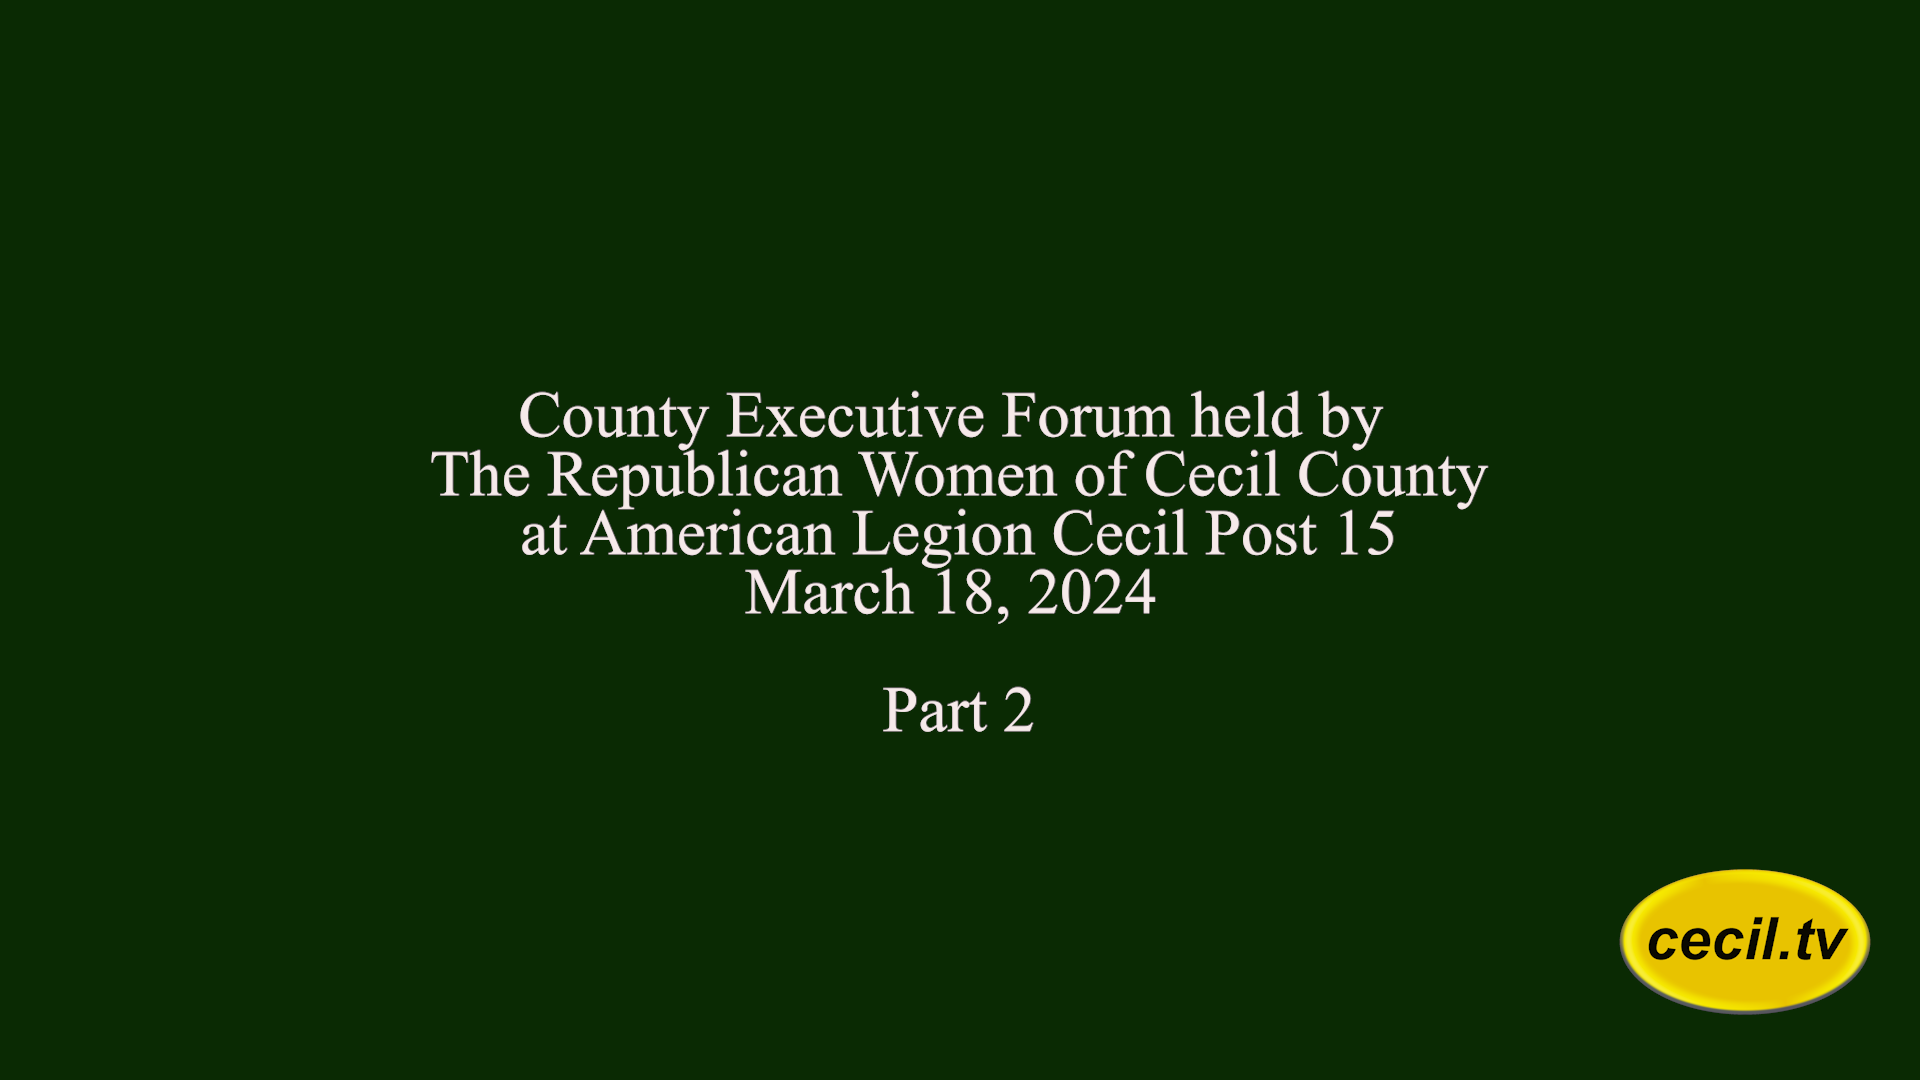 RWCC County Executive Candidates Forum  Part 2, March 18, 2024